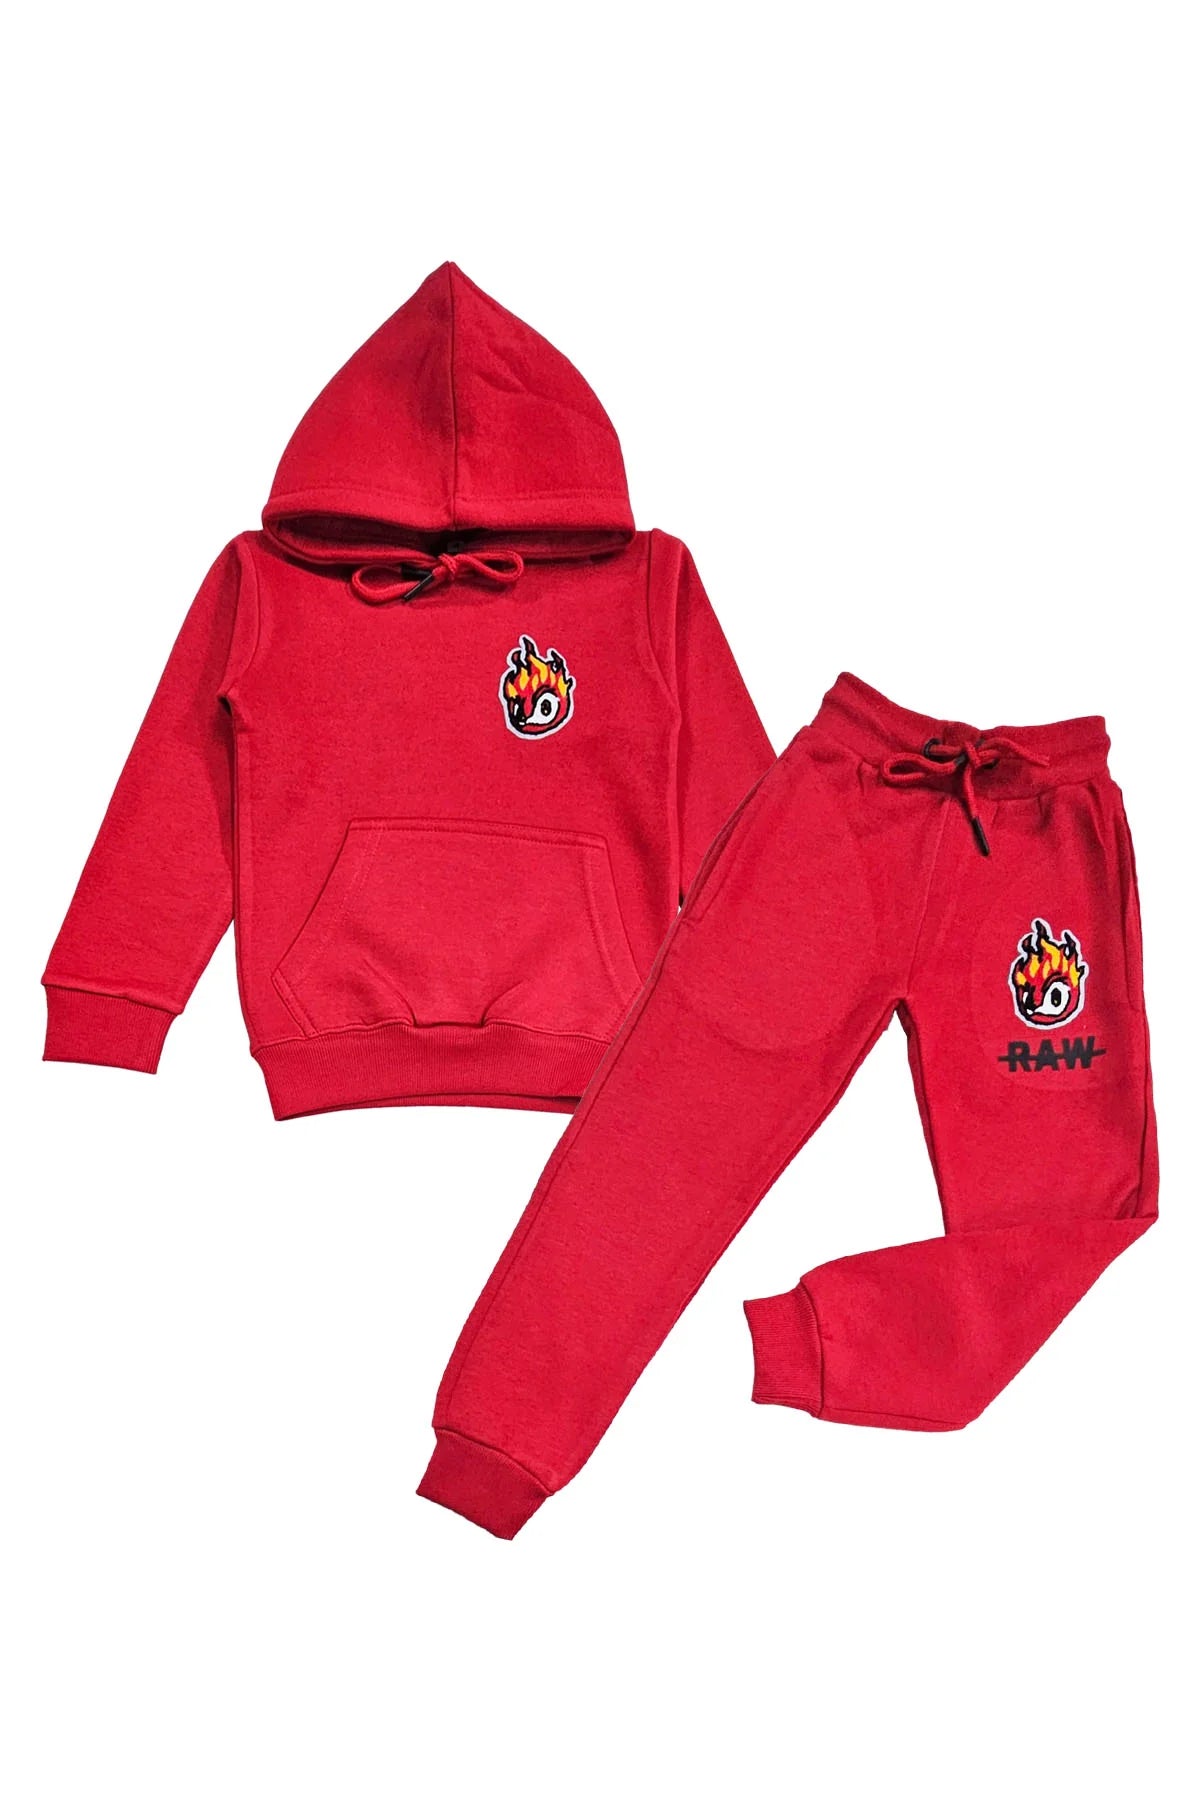 Kids Black Flame Silicone Chenille Set - Red